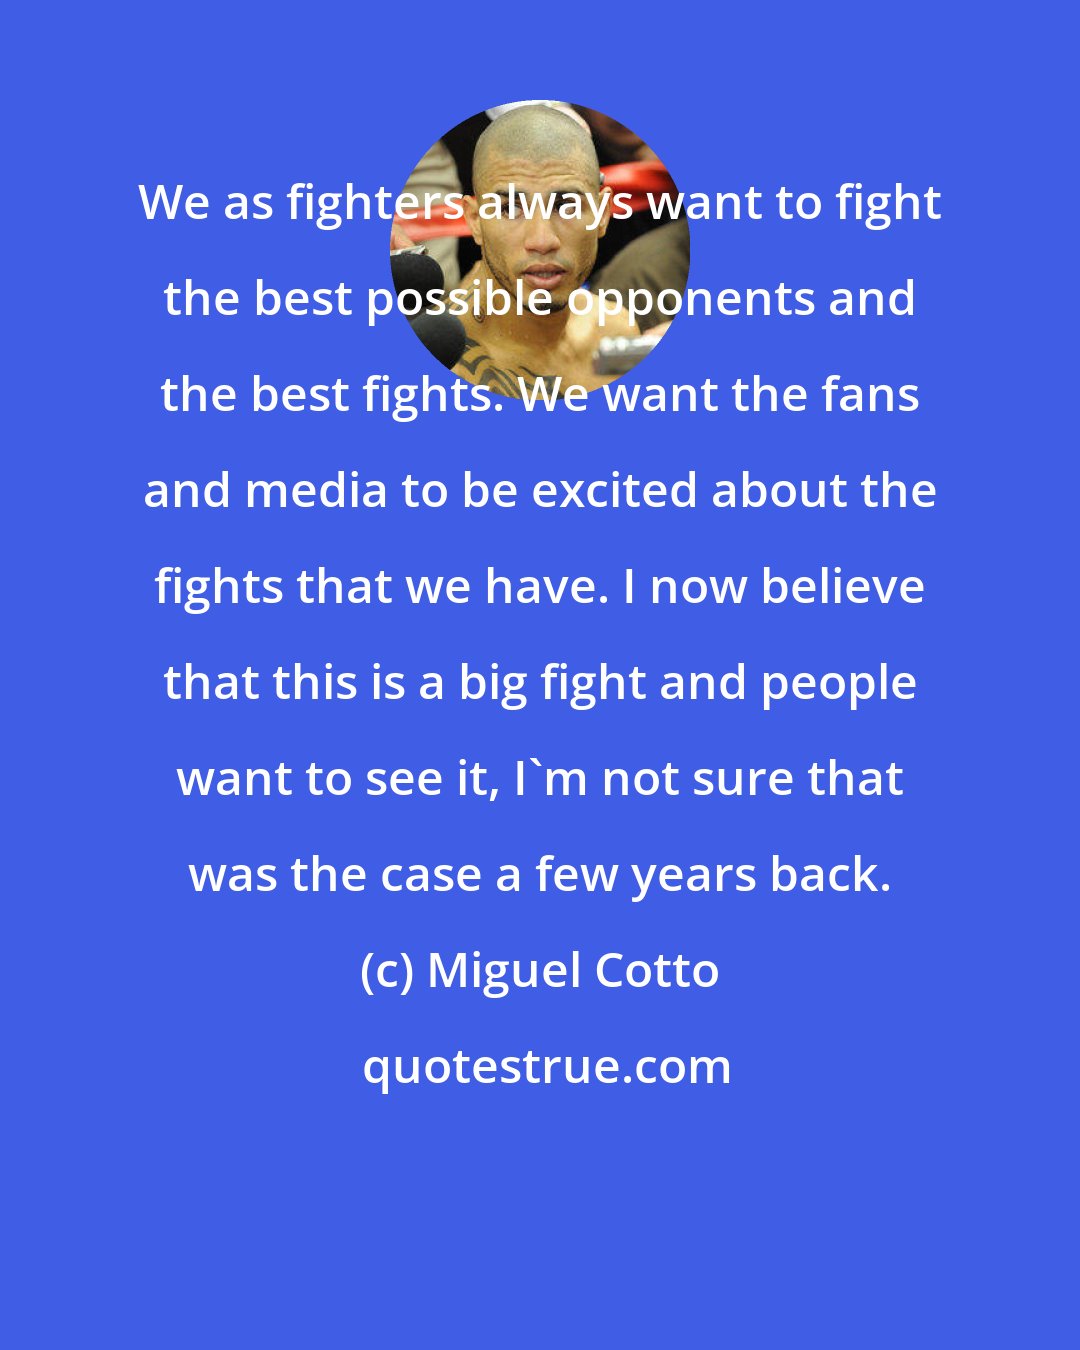 Miguel Cotto: We as fighters always want to fight the best possible opponents and the best fights. We want the fans and media to be excited about the fights that we have. I now believe that this is a big fight and people want to see it, I'm not sure that was the case a few years back.